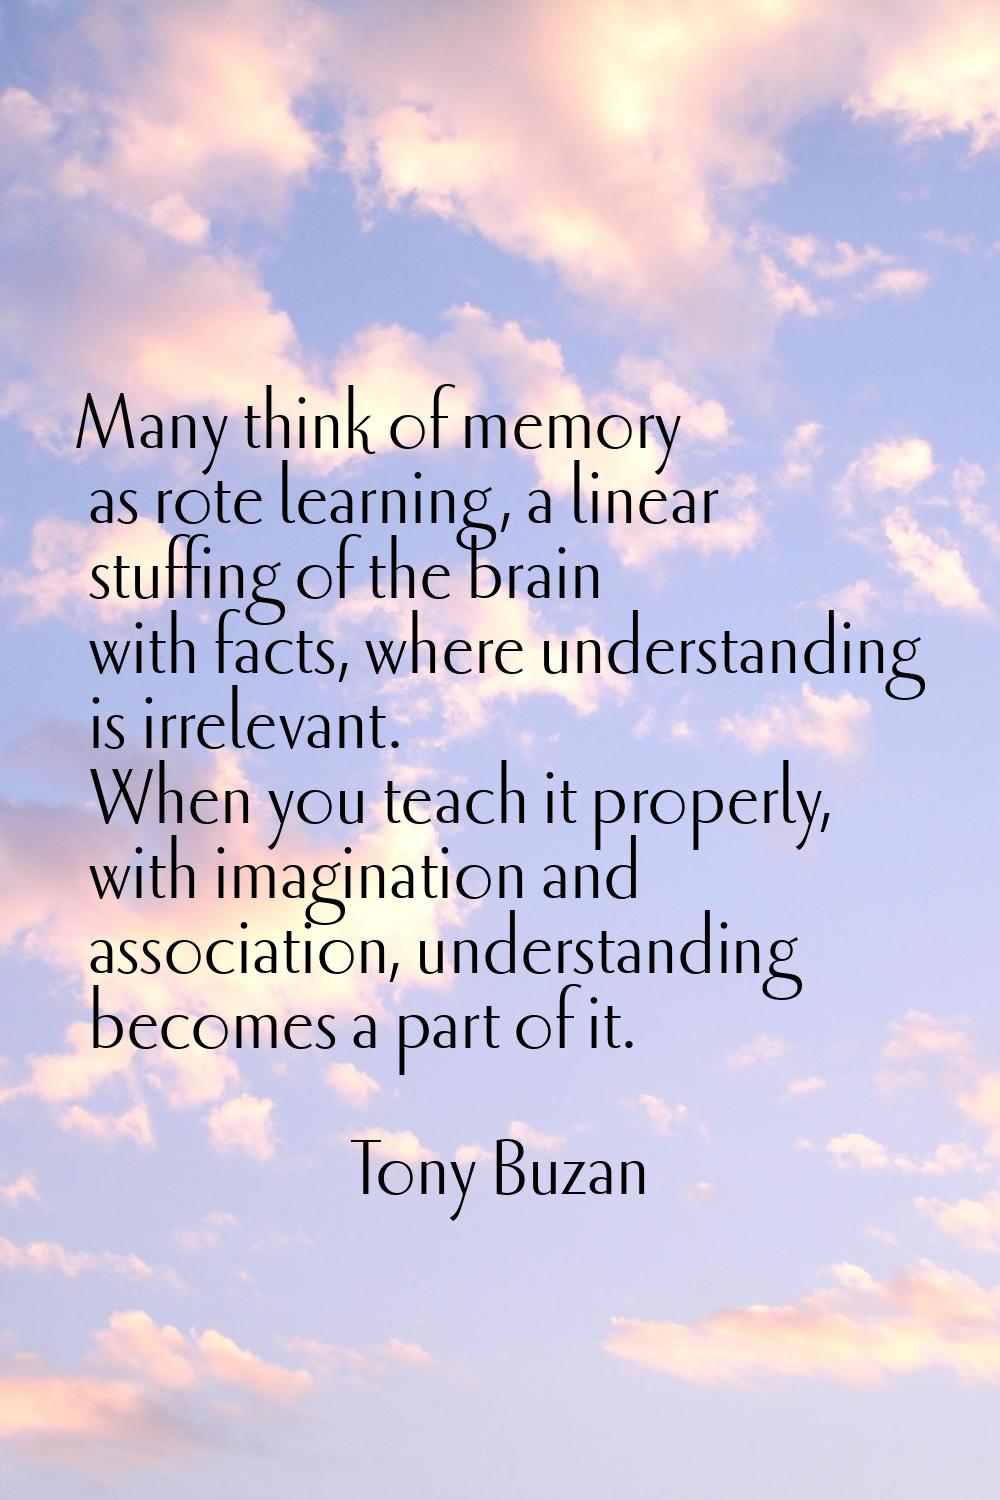 Many think of memory as rote learning, a linear stuffing of the brain with facts, where understandi